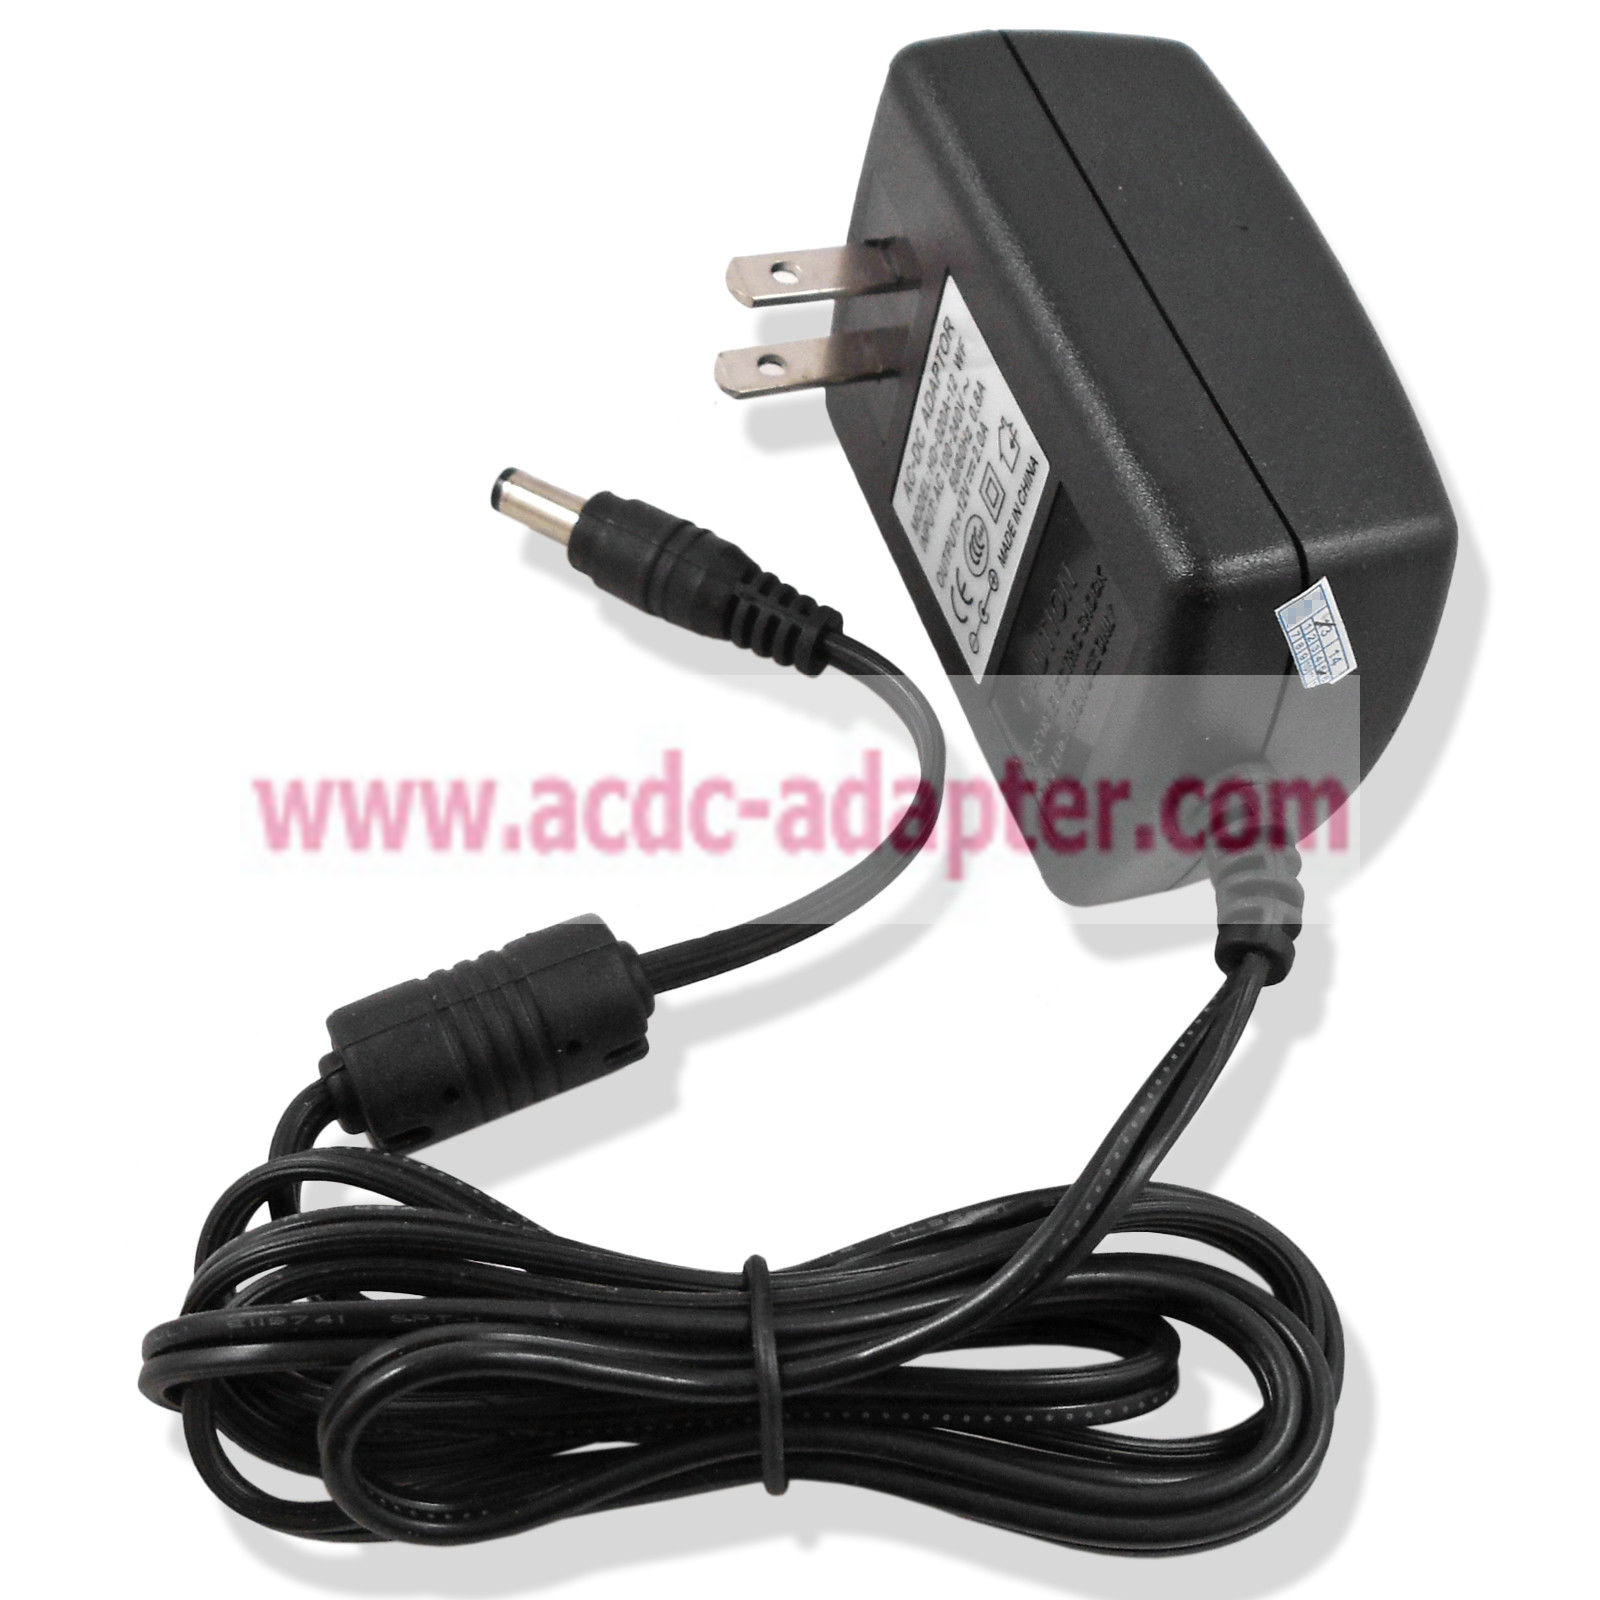 NEW 12V 2A AC DC Adapter Charger for Seagate 1tb 2tb 3tb 4tb External Hard Drive